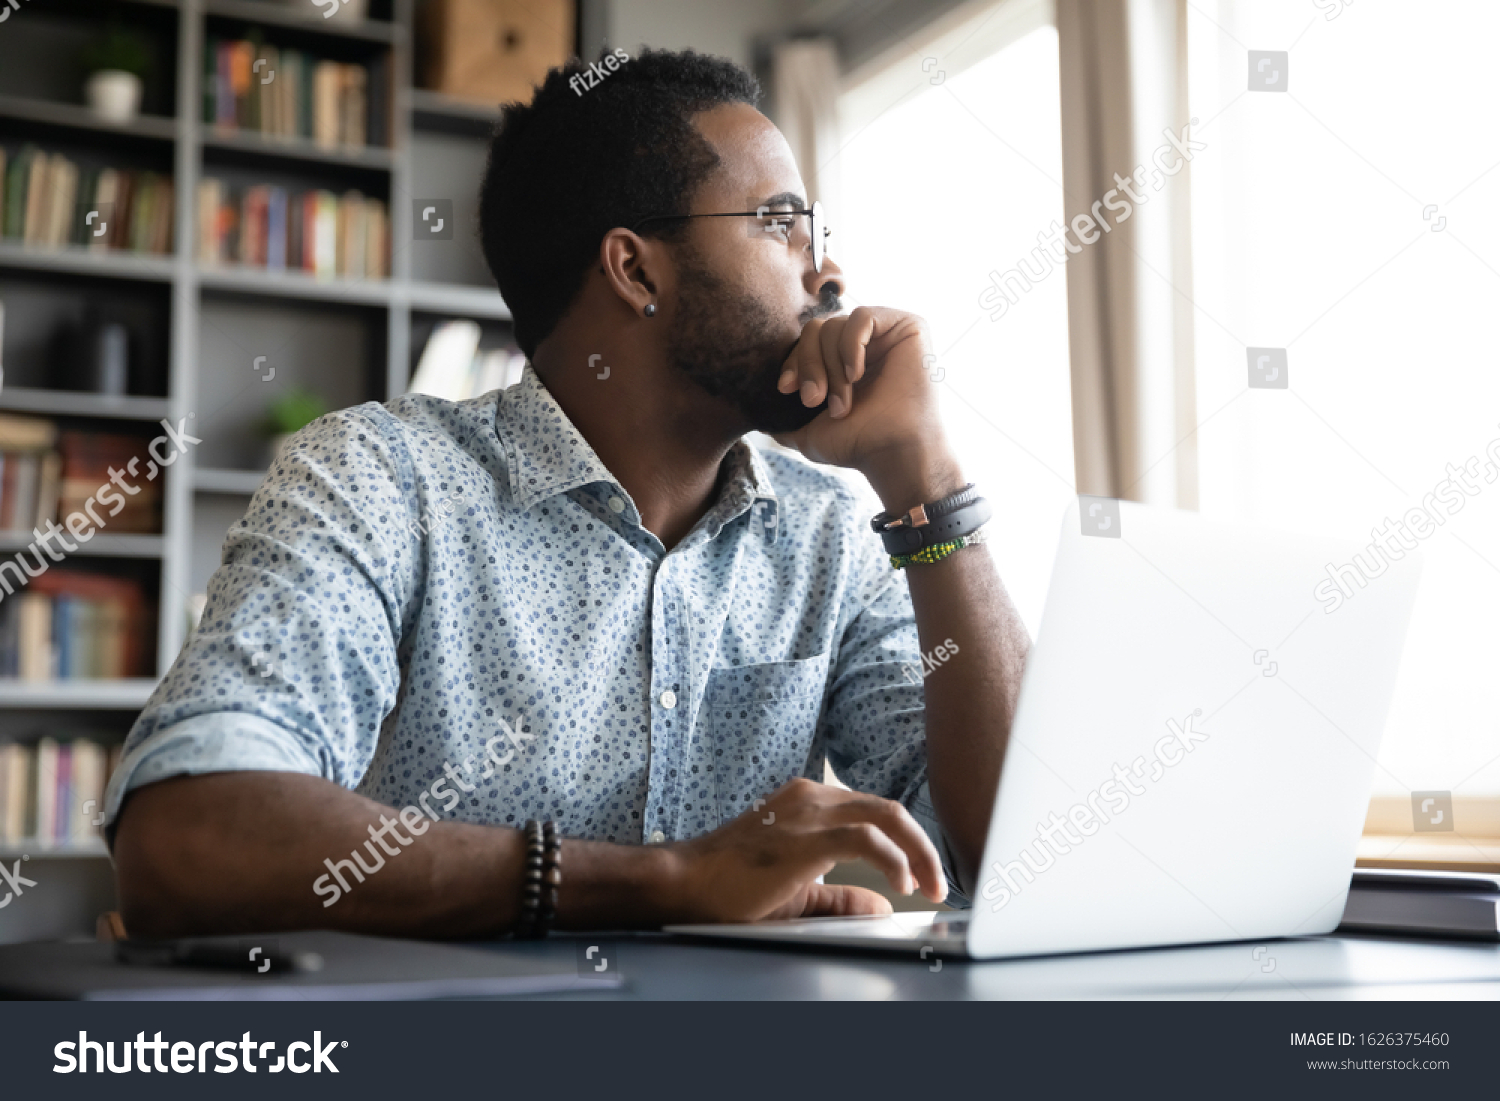 Thoughtful serious african professional business man sit with laptop thinking of difficult project challenge looking for problem solution searching creative ideas lost in thoughts at home office desk #1626375460